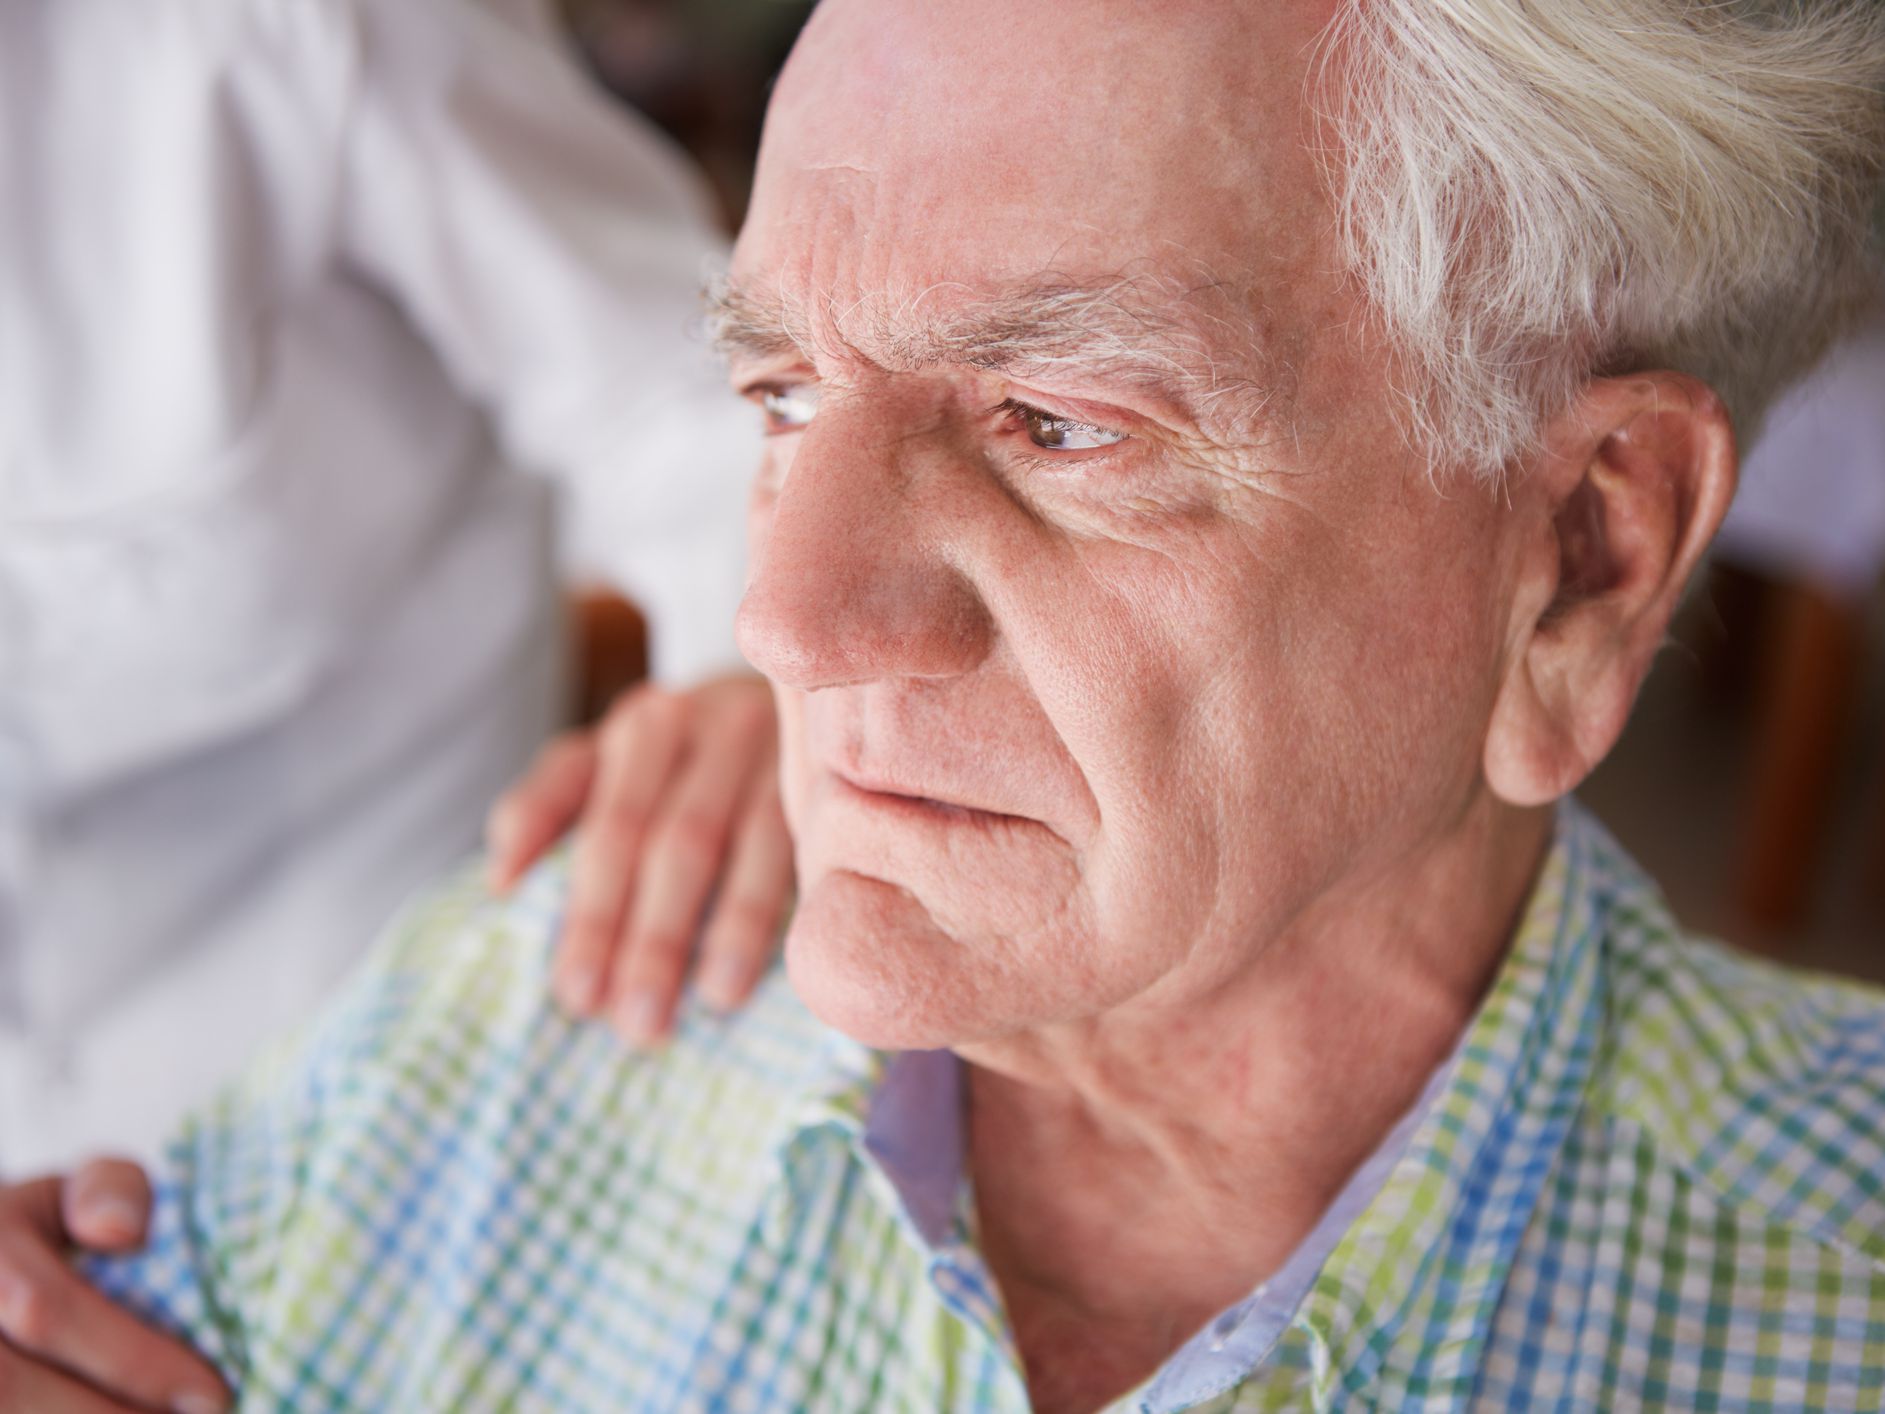 How To Talk To Someone With Dementia That Is Angry